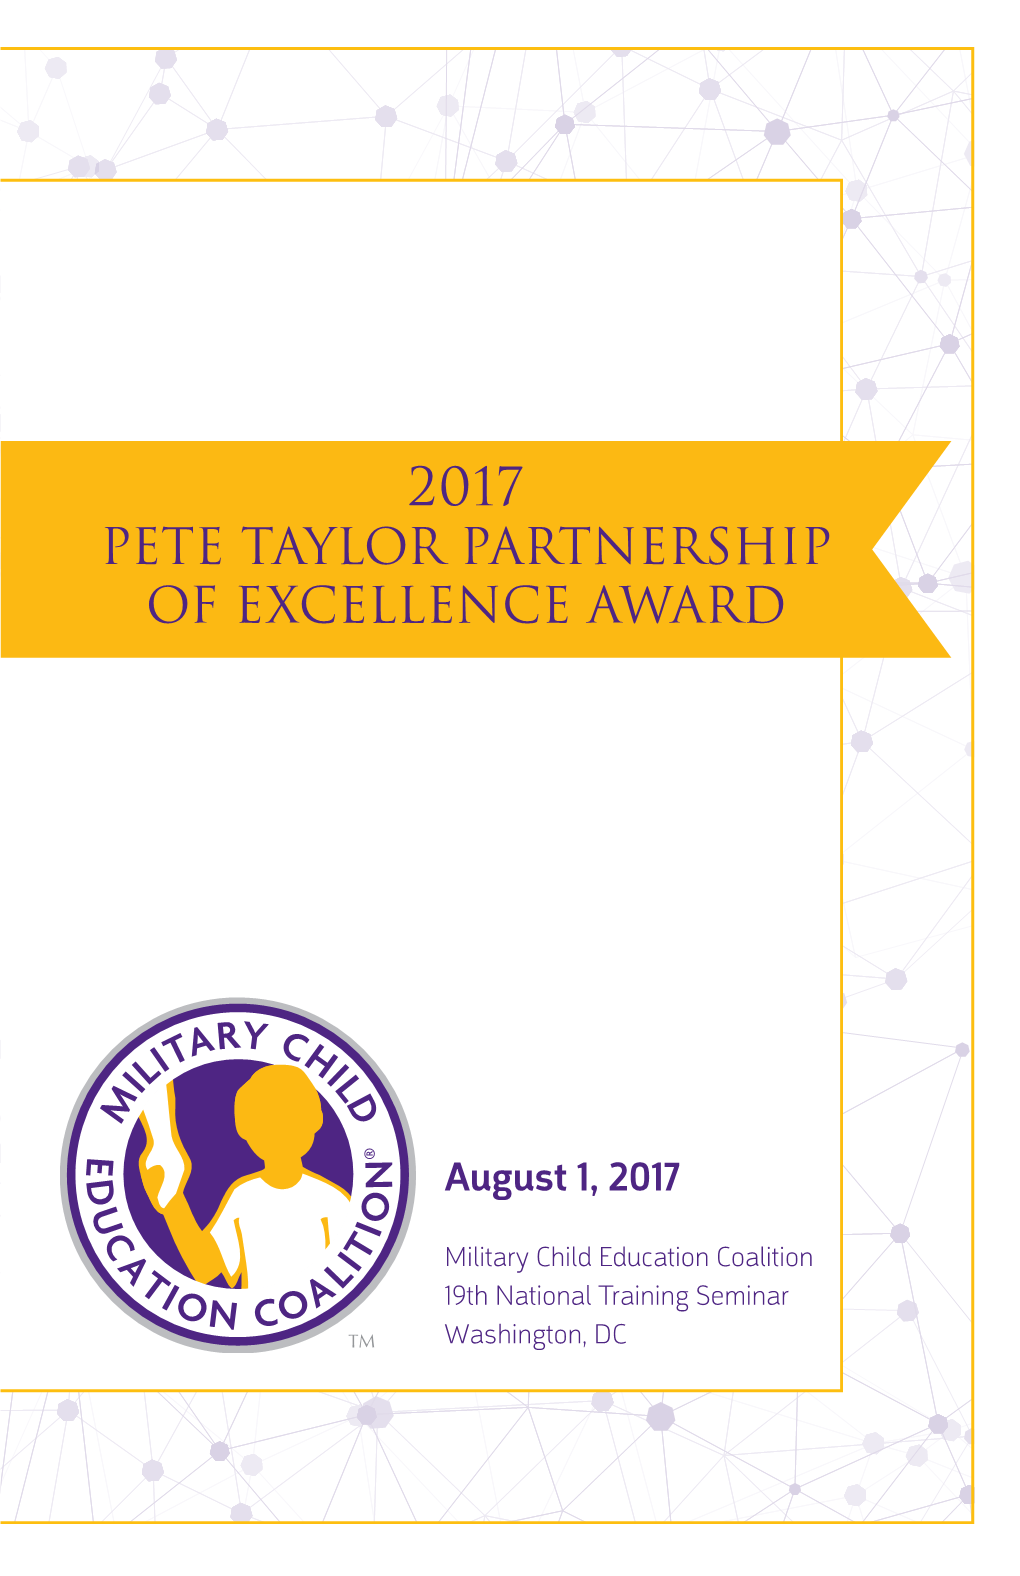 PETE TAYLOR Partnership of Excellence Award